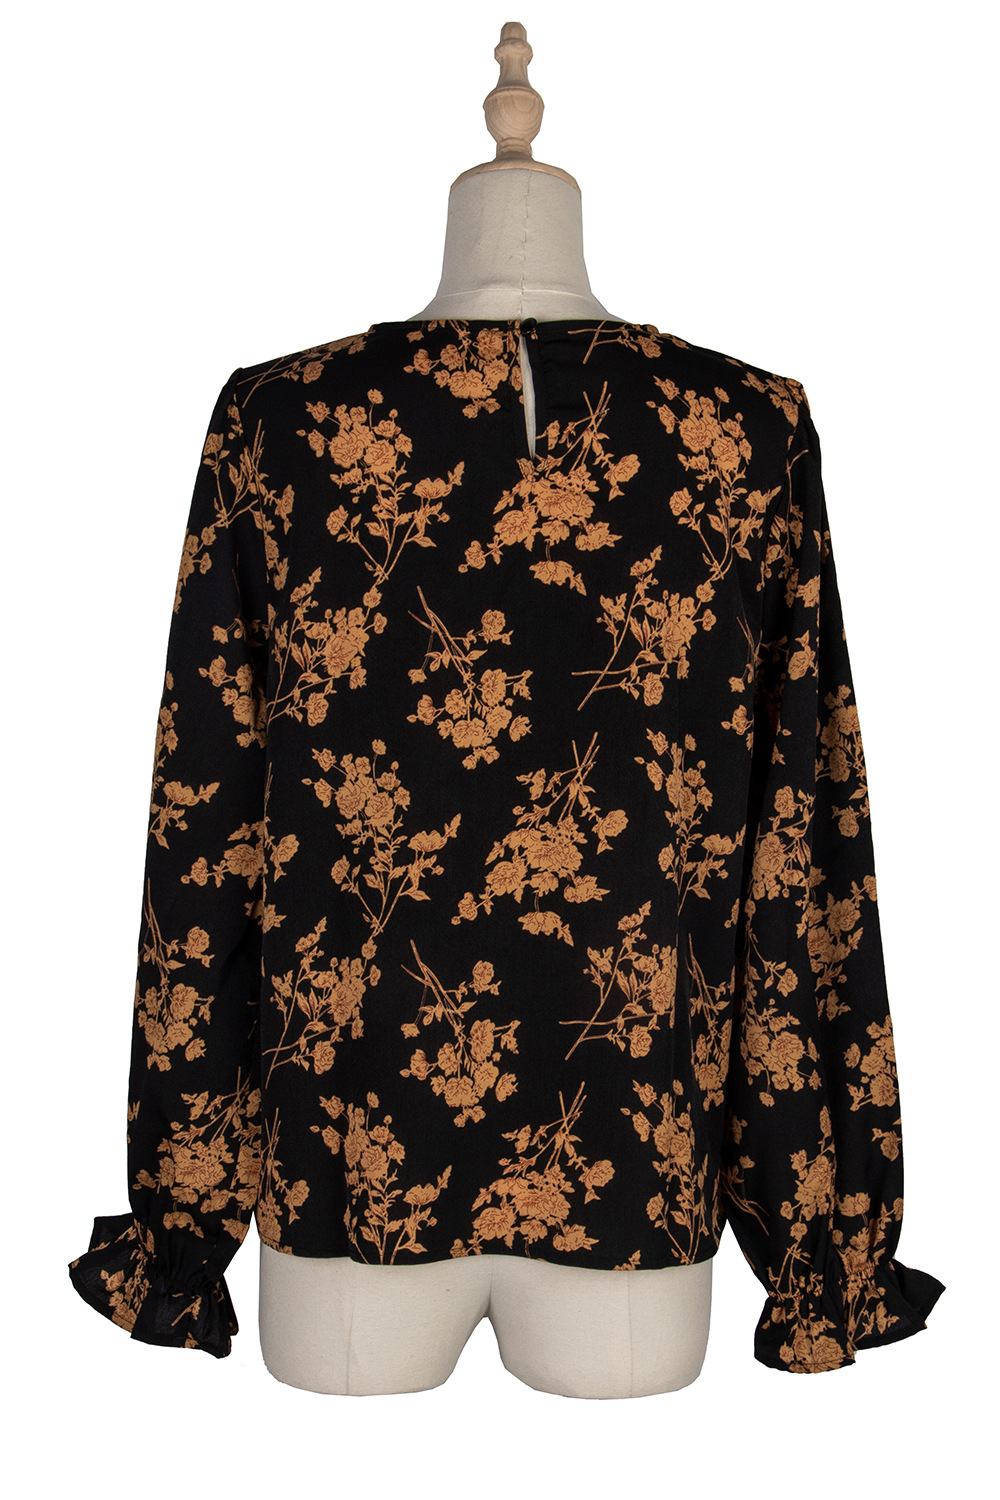 Printing chiffon autumn and winter tops for women